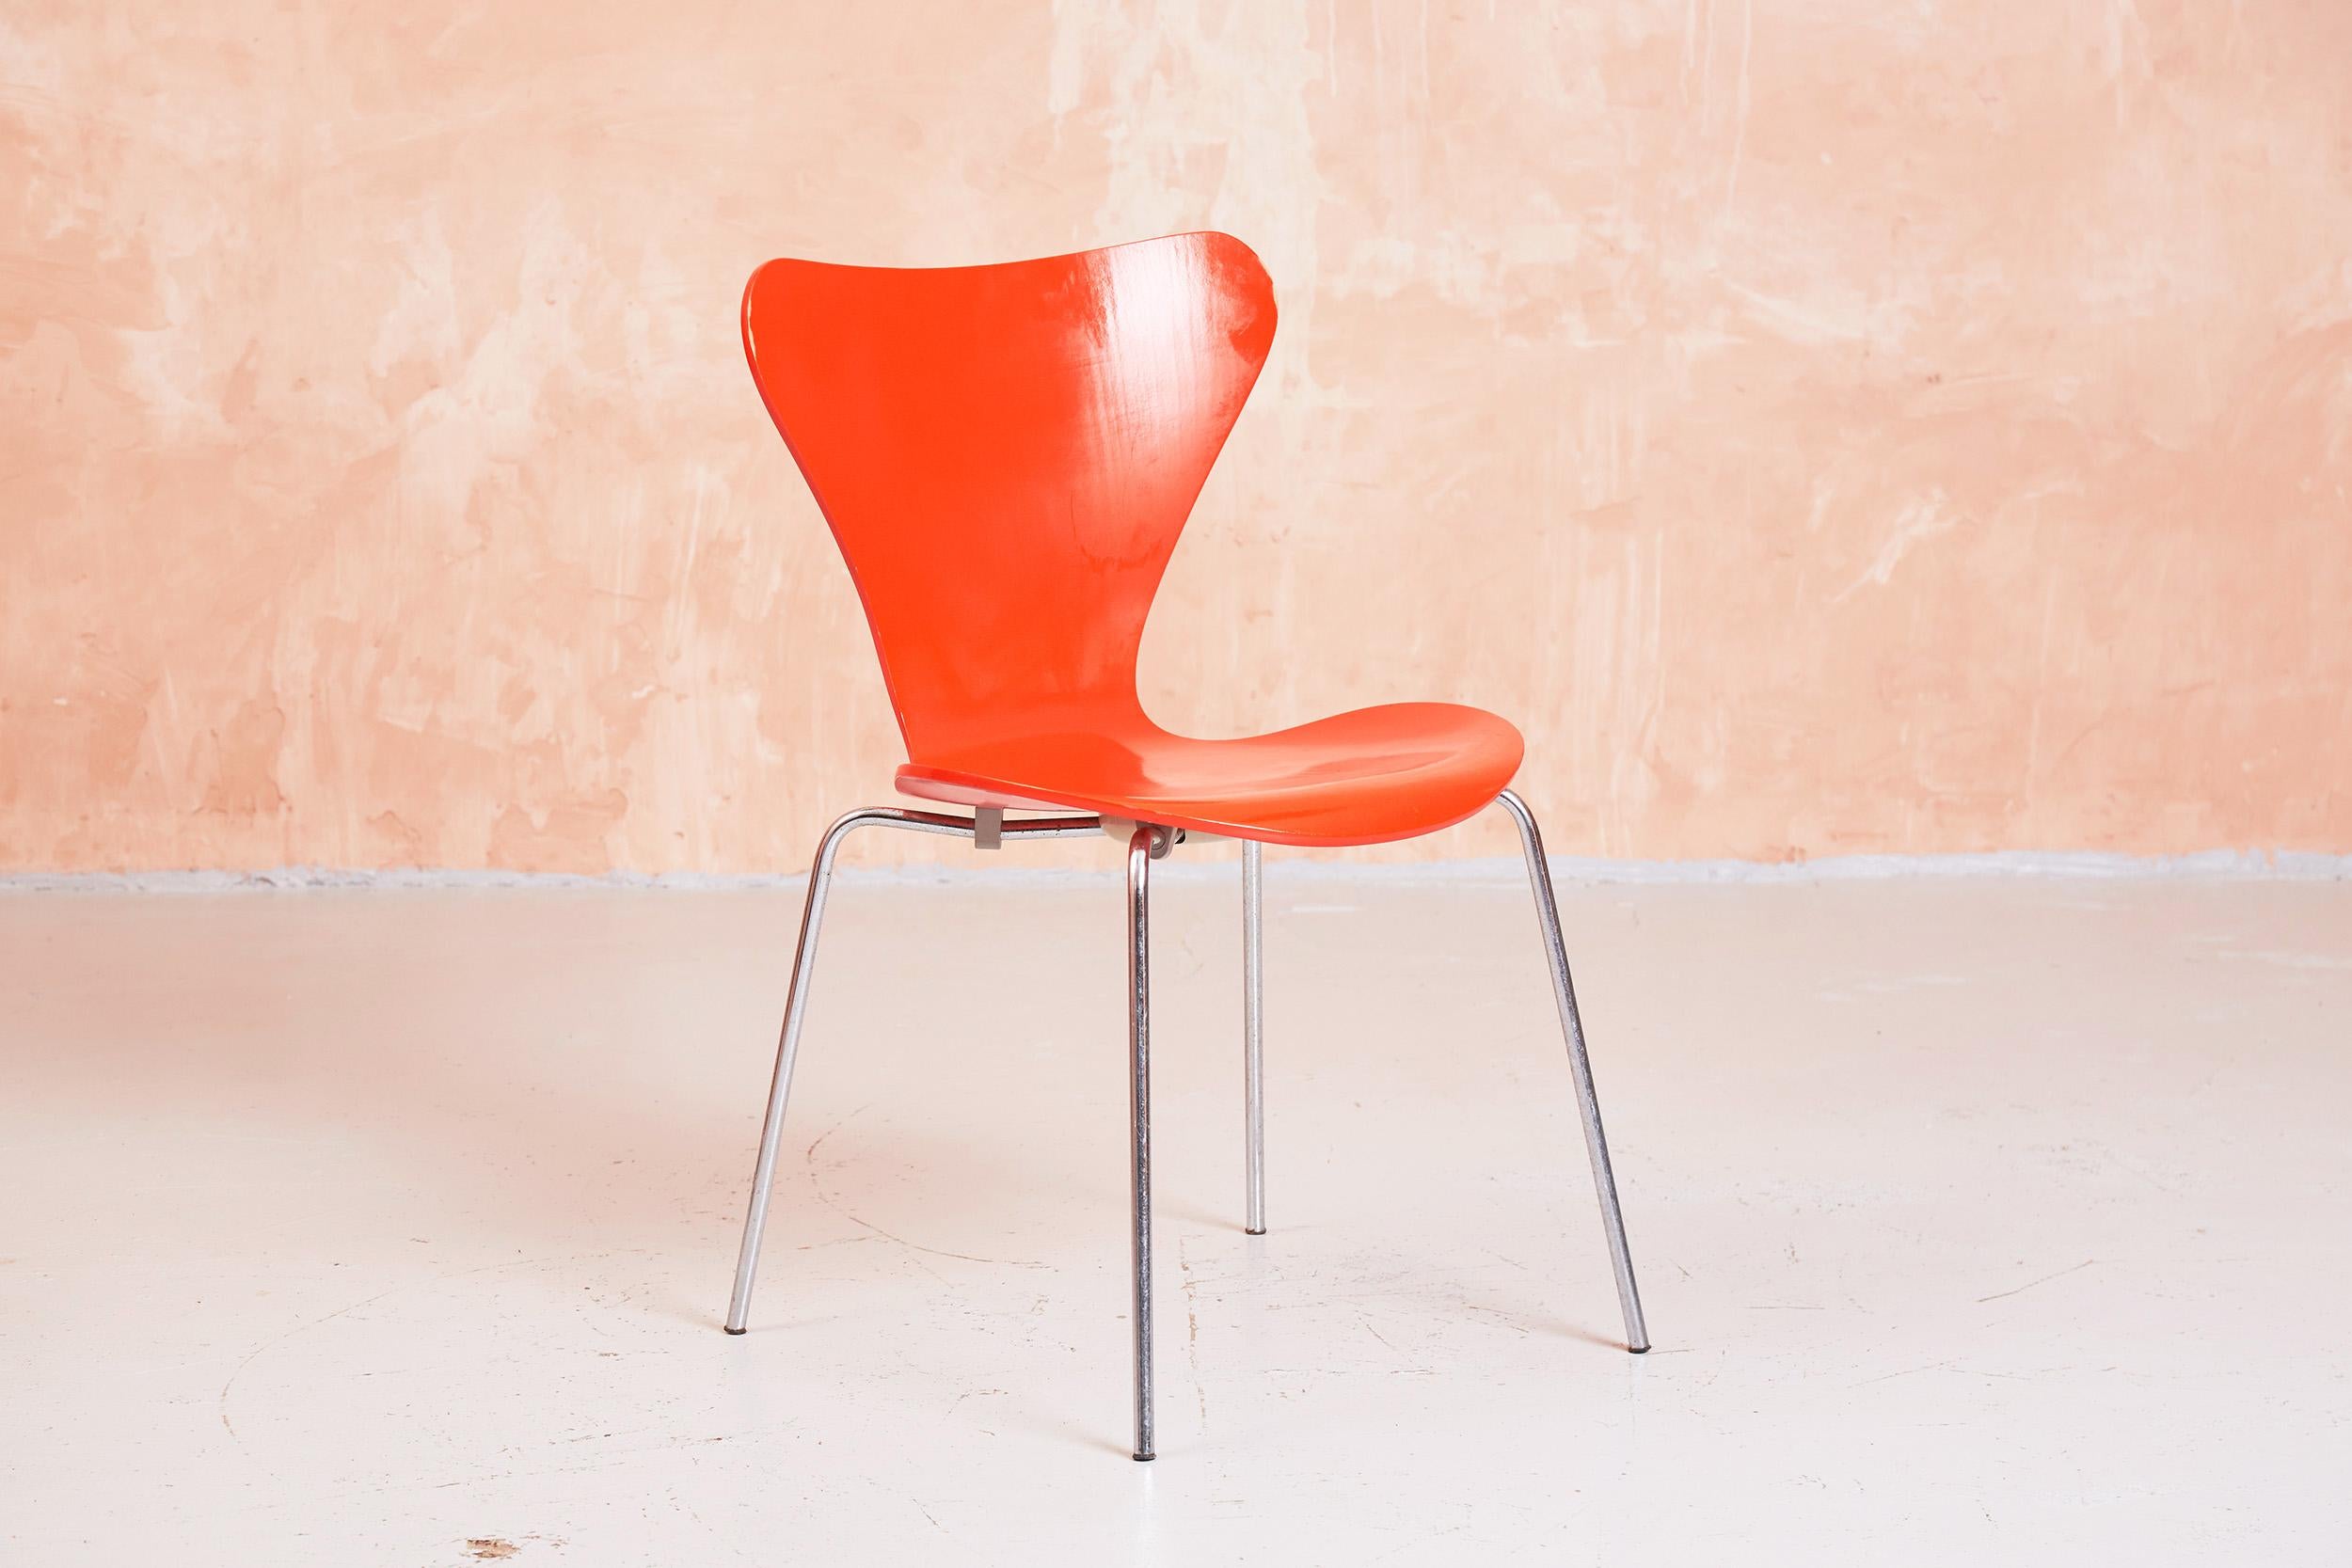 Late 20th Century Arne Jacobsen 3107 Series 7 Chairs in Orange by Fritz Hansen, 1974 For Sale